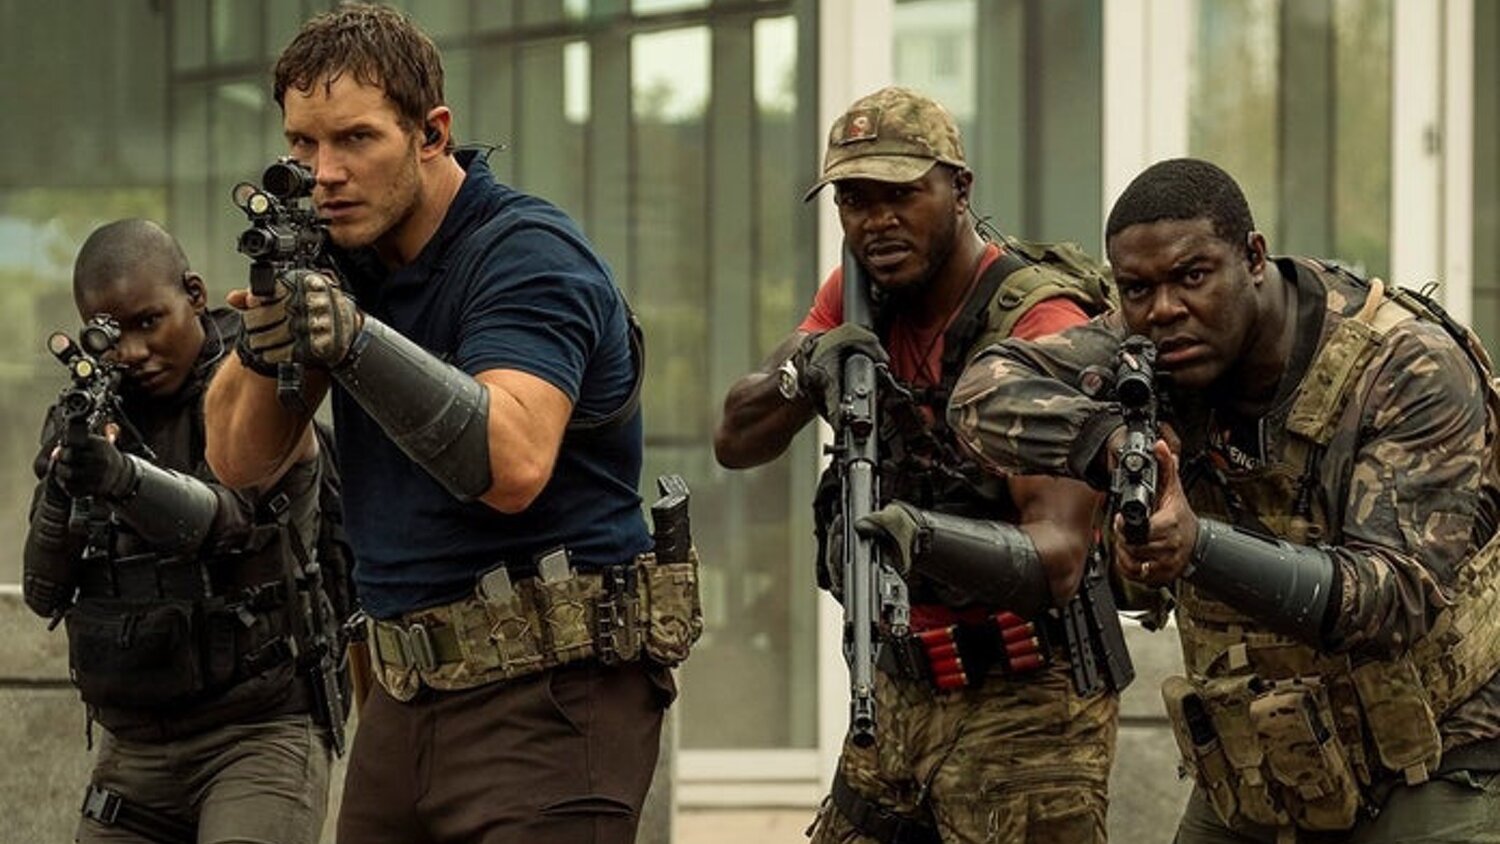 New Photo Shared For Chris Pratt's Sci Fi Action Movie THE TOMORROW WAR